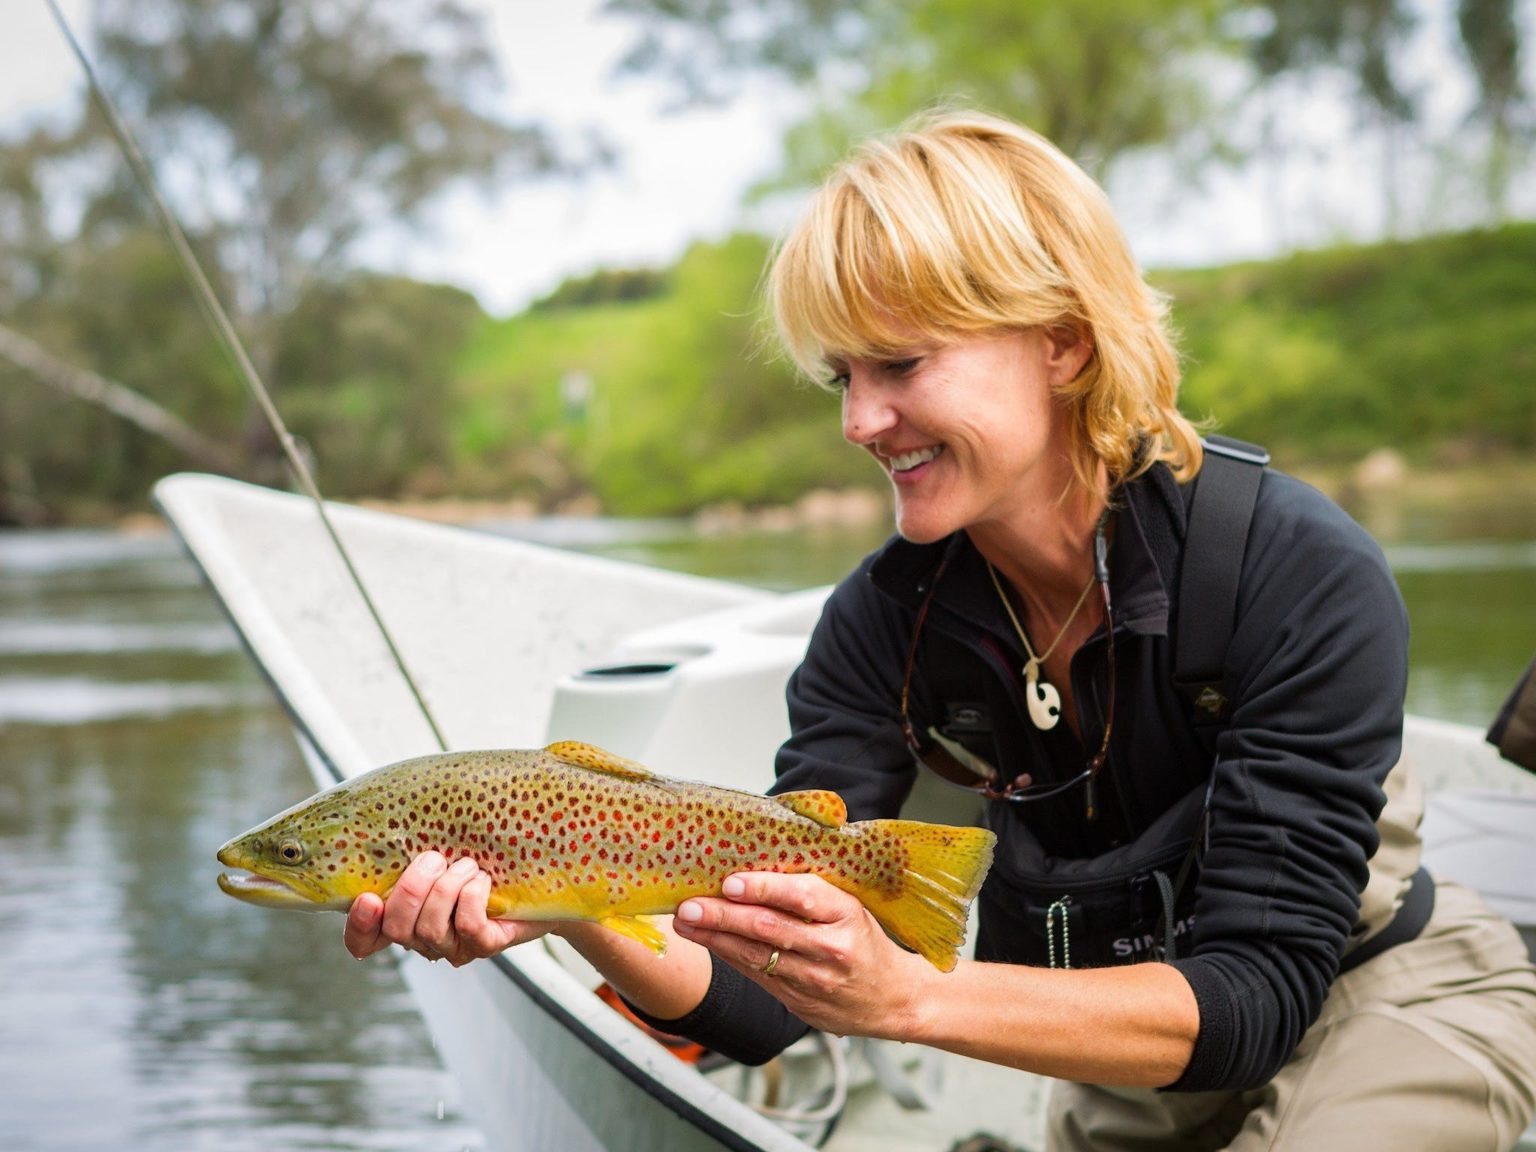 Lady gently cradling a brown trout just prior to release